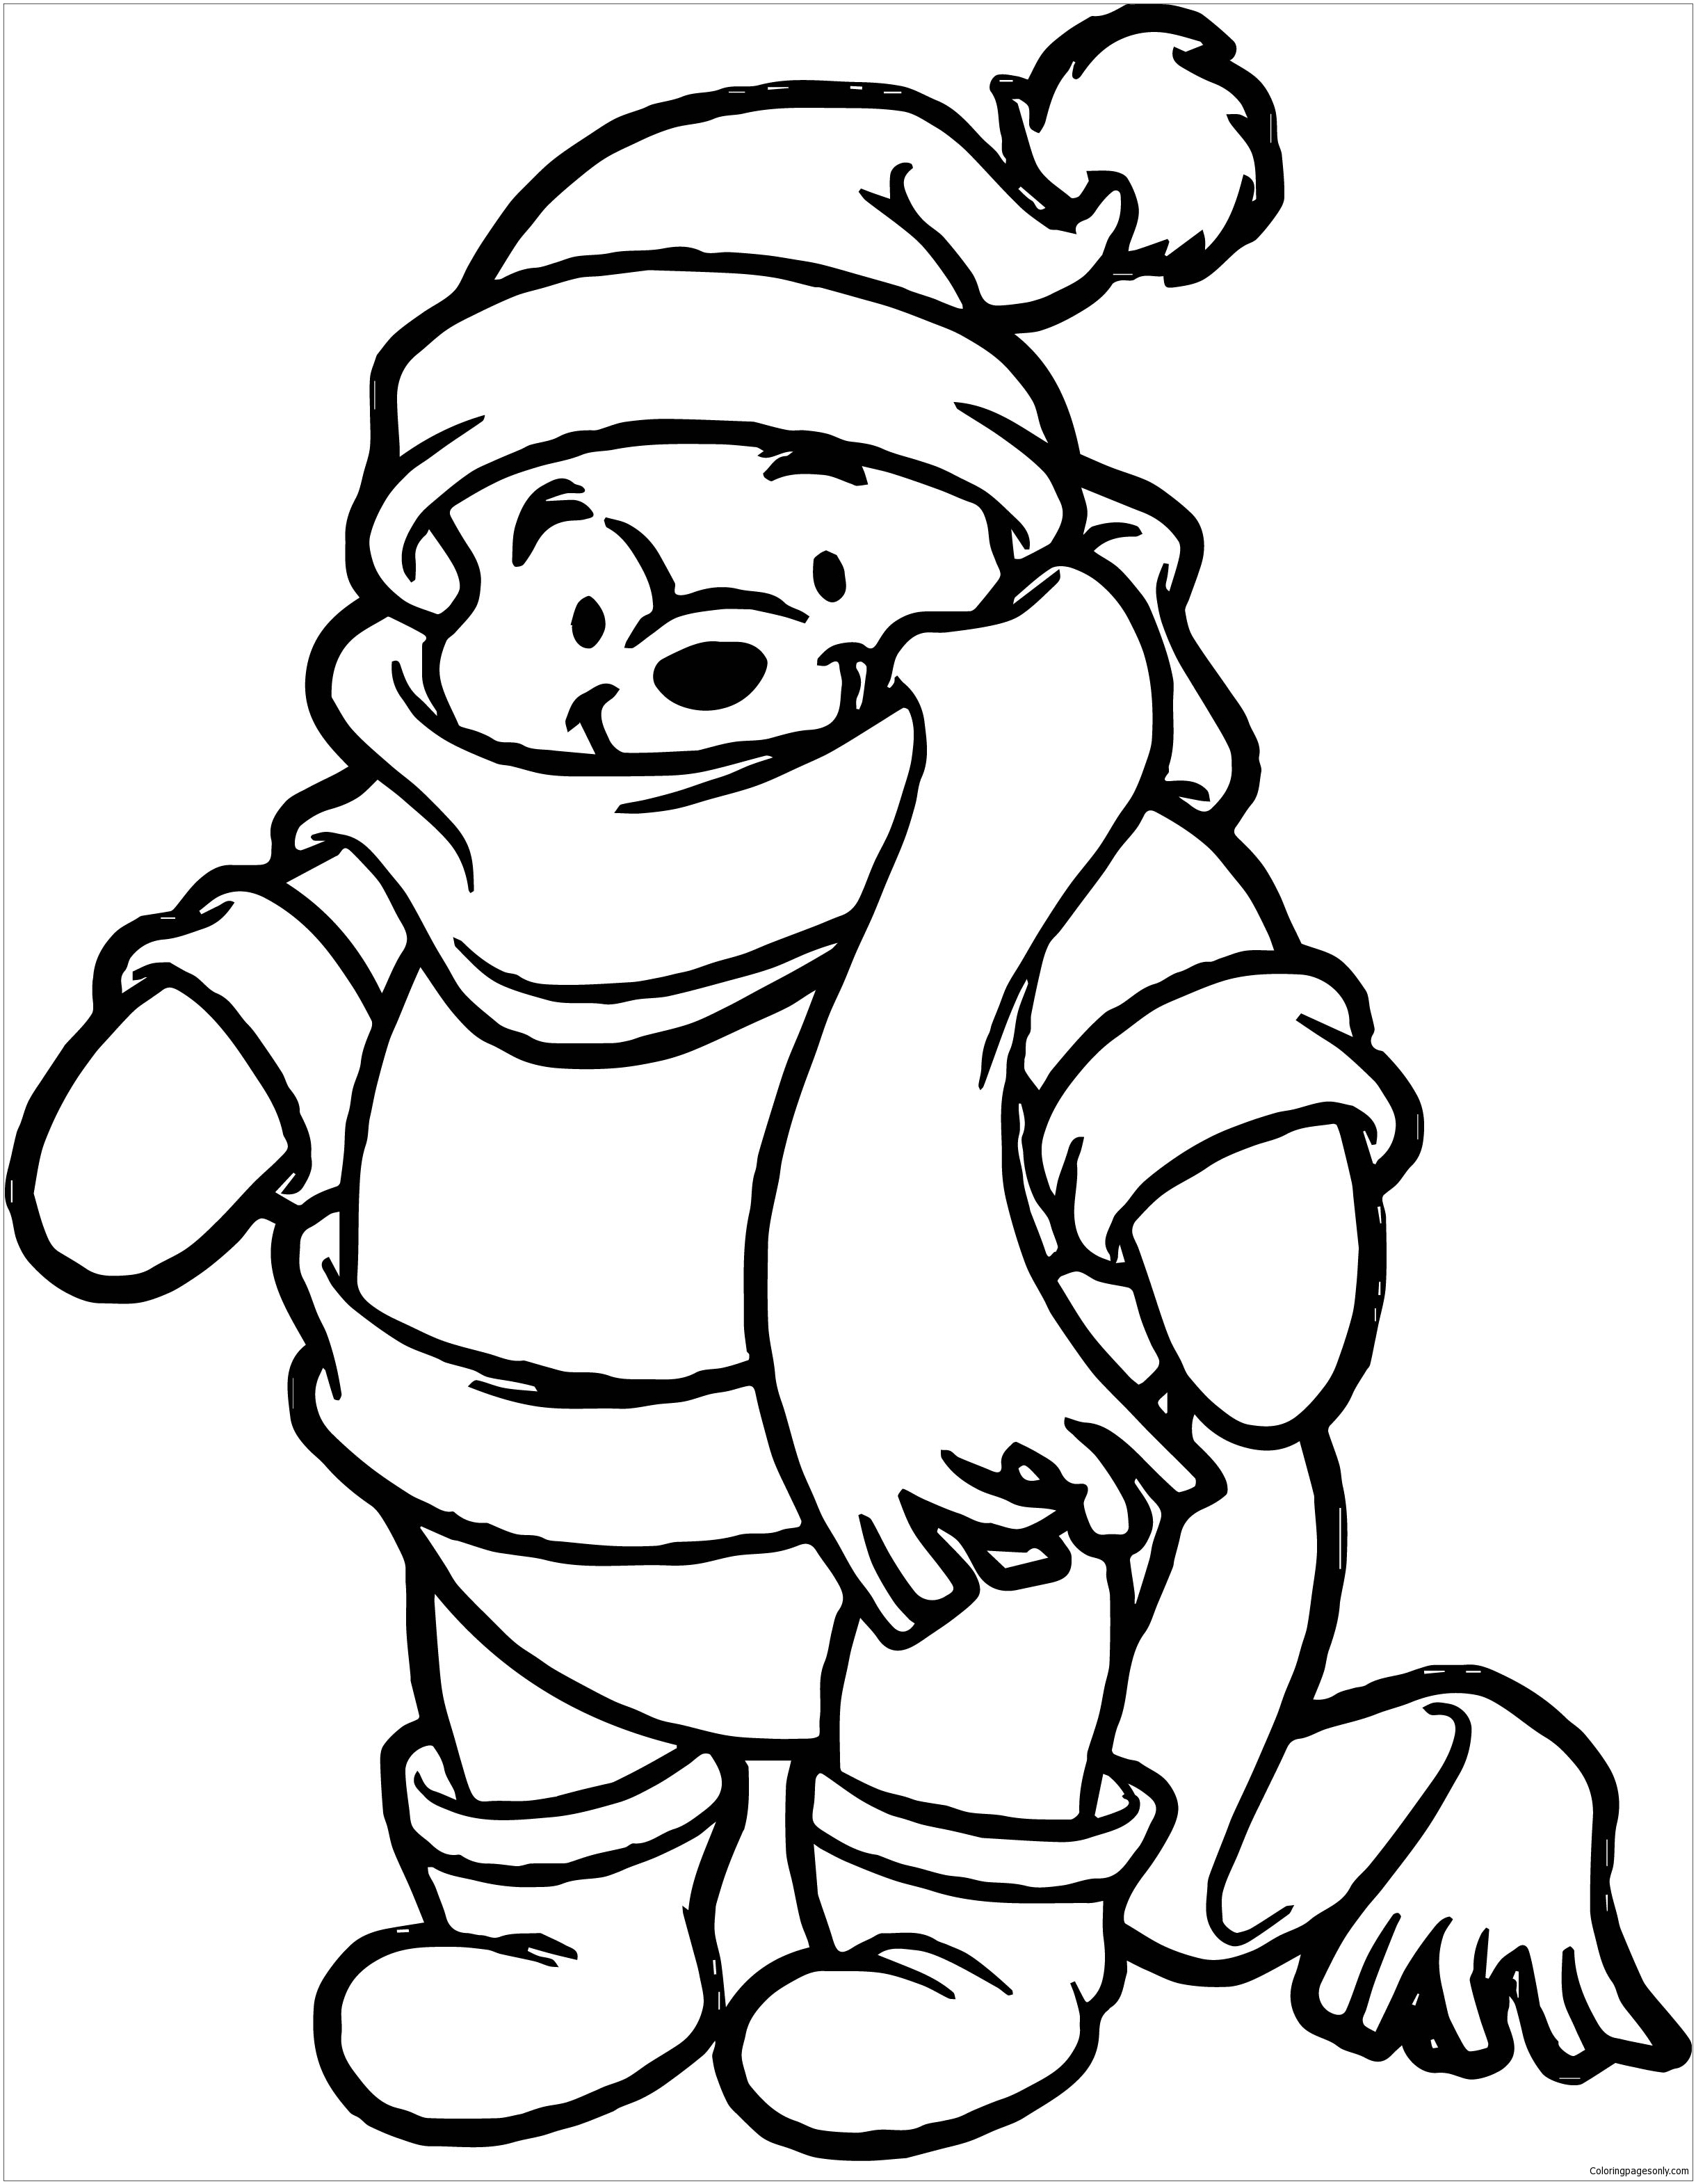 Winnie The Pooh Winter Coloring Page - Free Coloring Pages Online